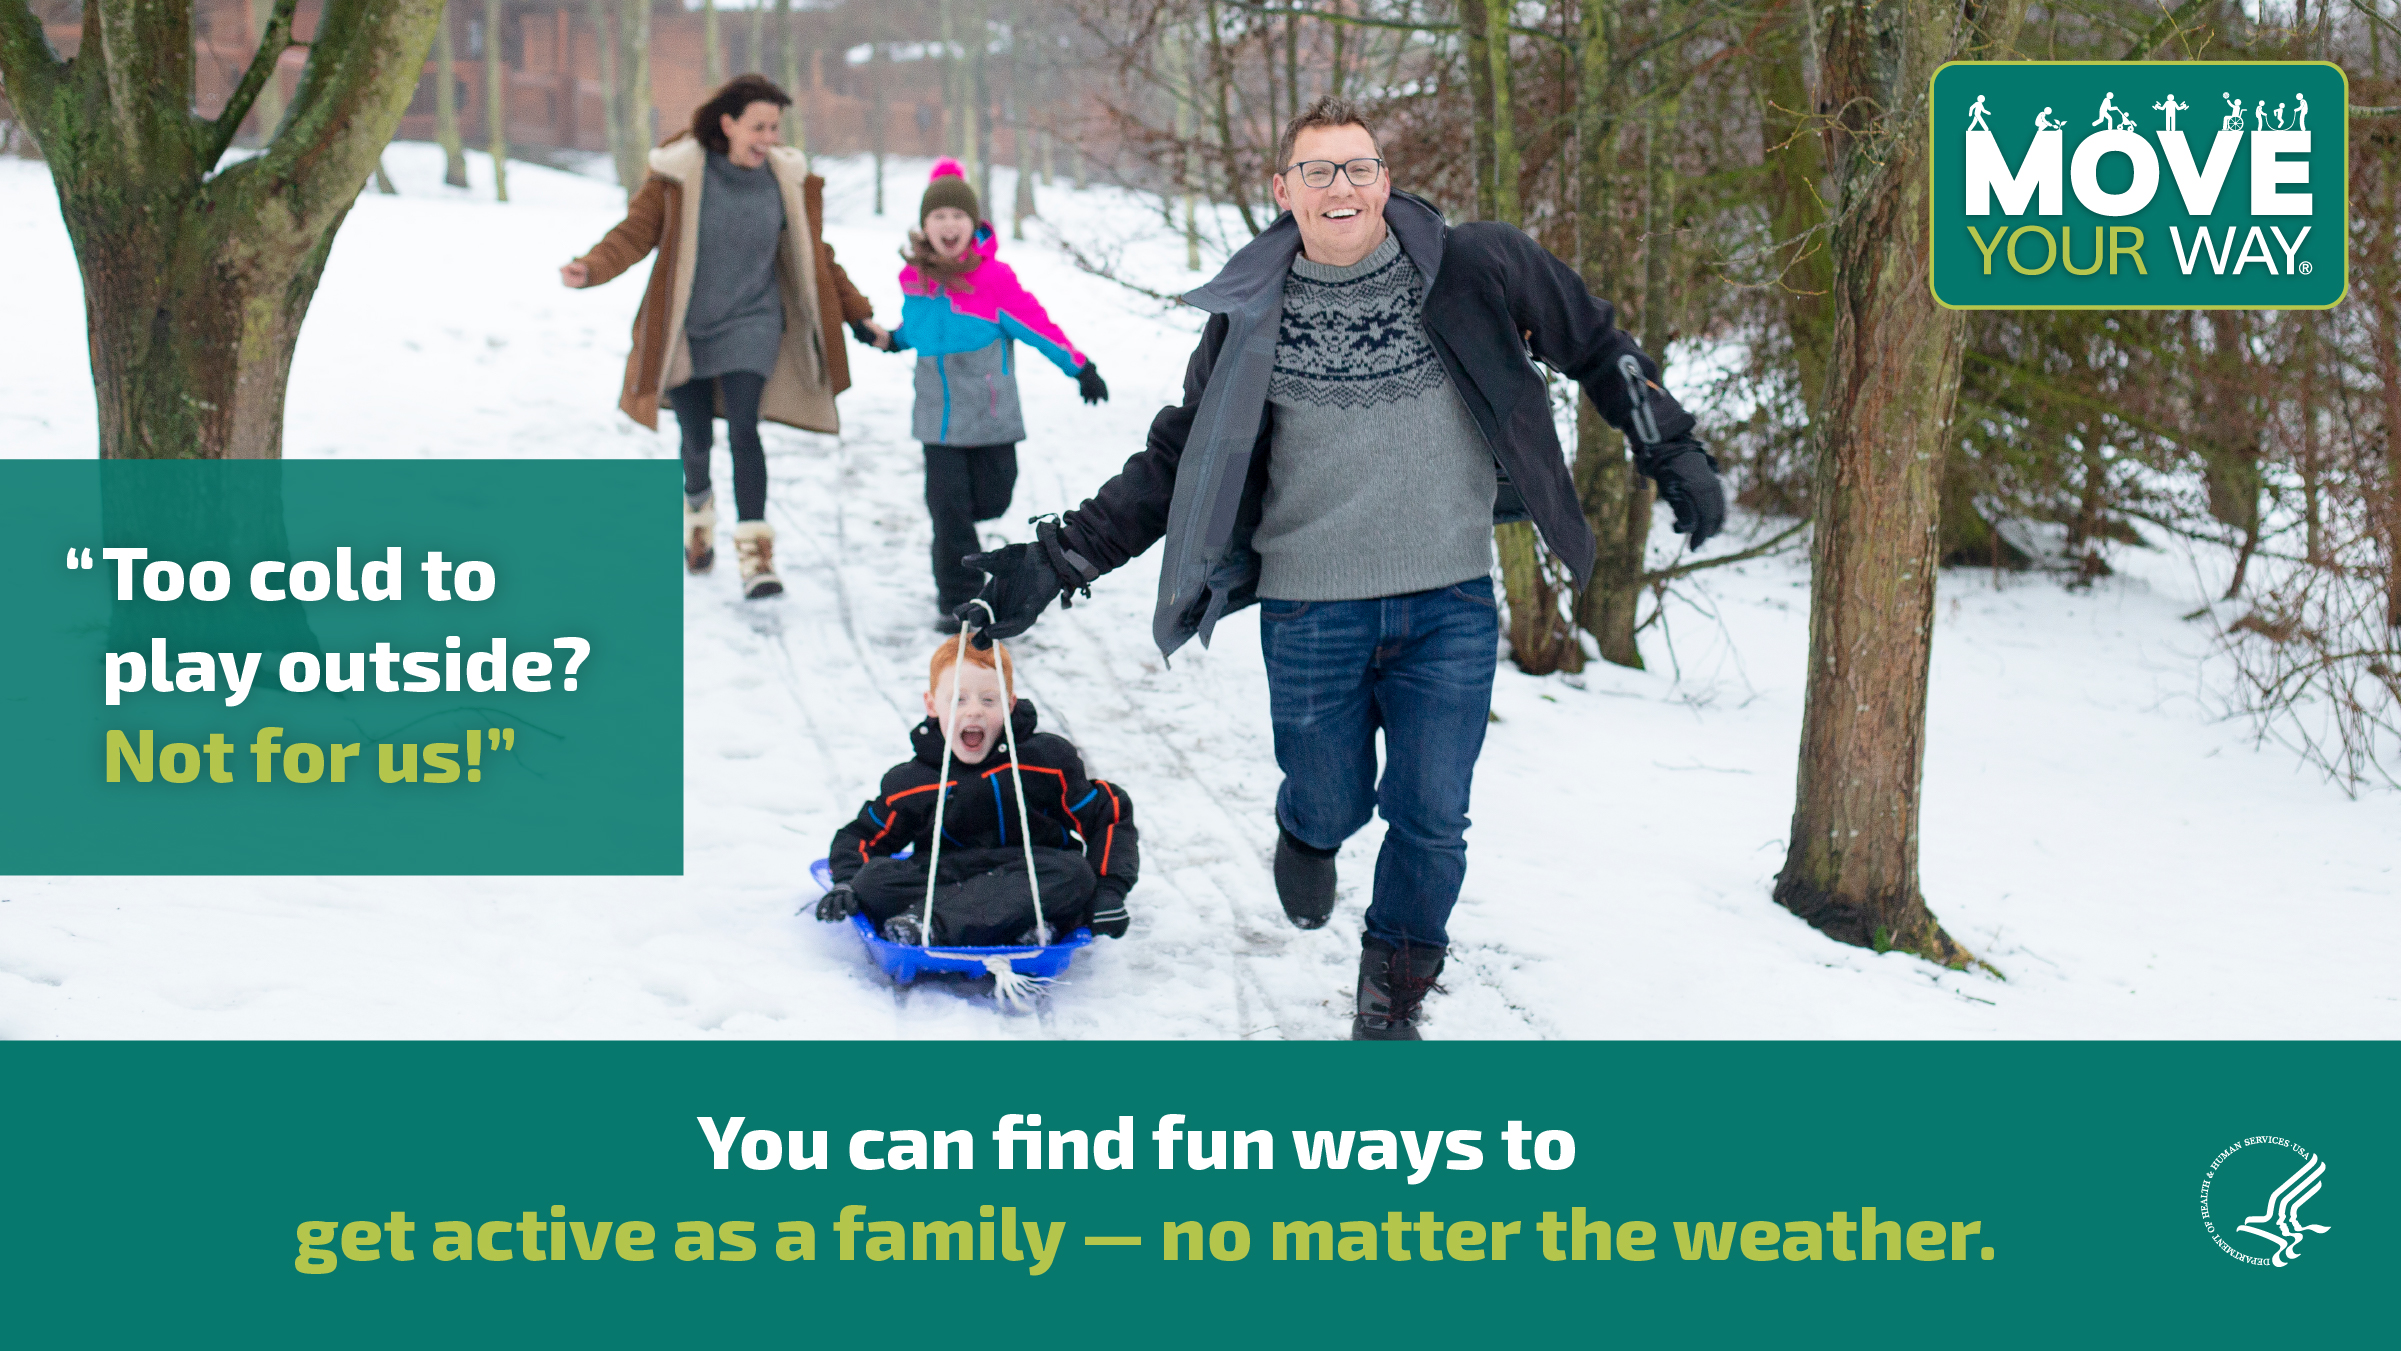 A white mother, white father, and 2 kids are playing out in the snow. The father is pulling the son on a sled as they race downhill. The mother and daughter hold hands as they’re running after them, laughing. The image also shows the Move Your Way logo and the following messages: "Too cold to play outside? Not for us!" and "You can find fun ways to get active as a family — no matter the weather."